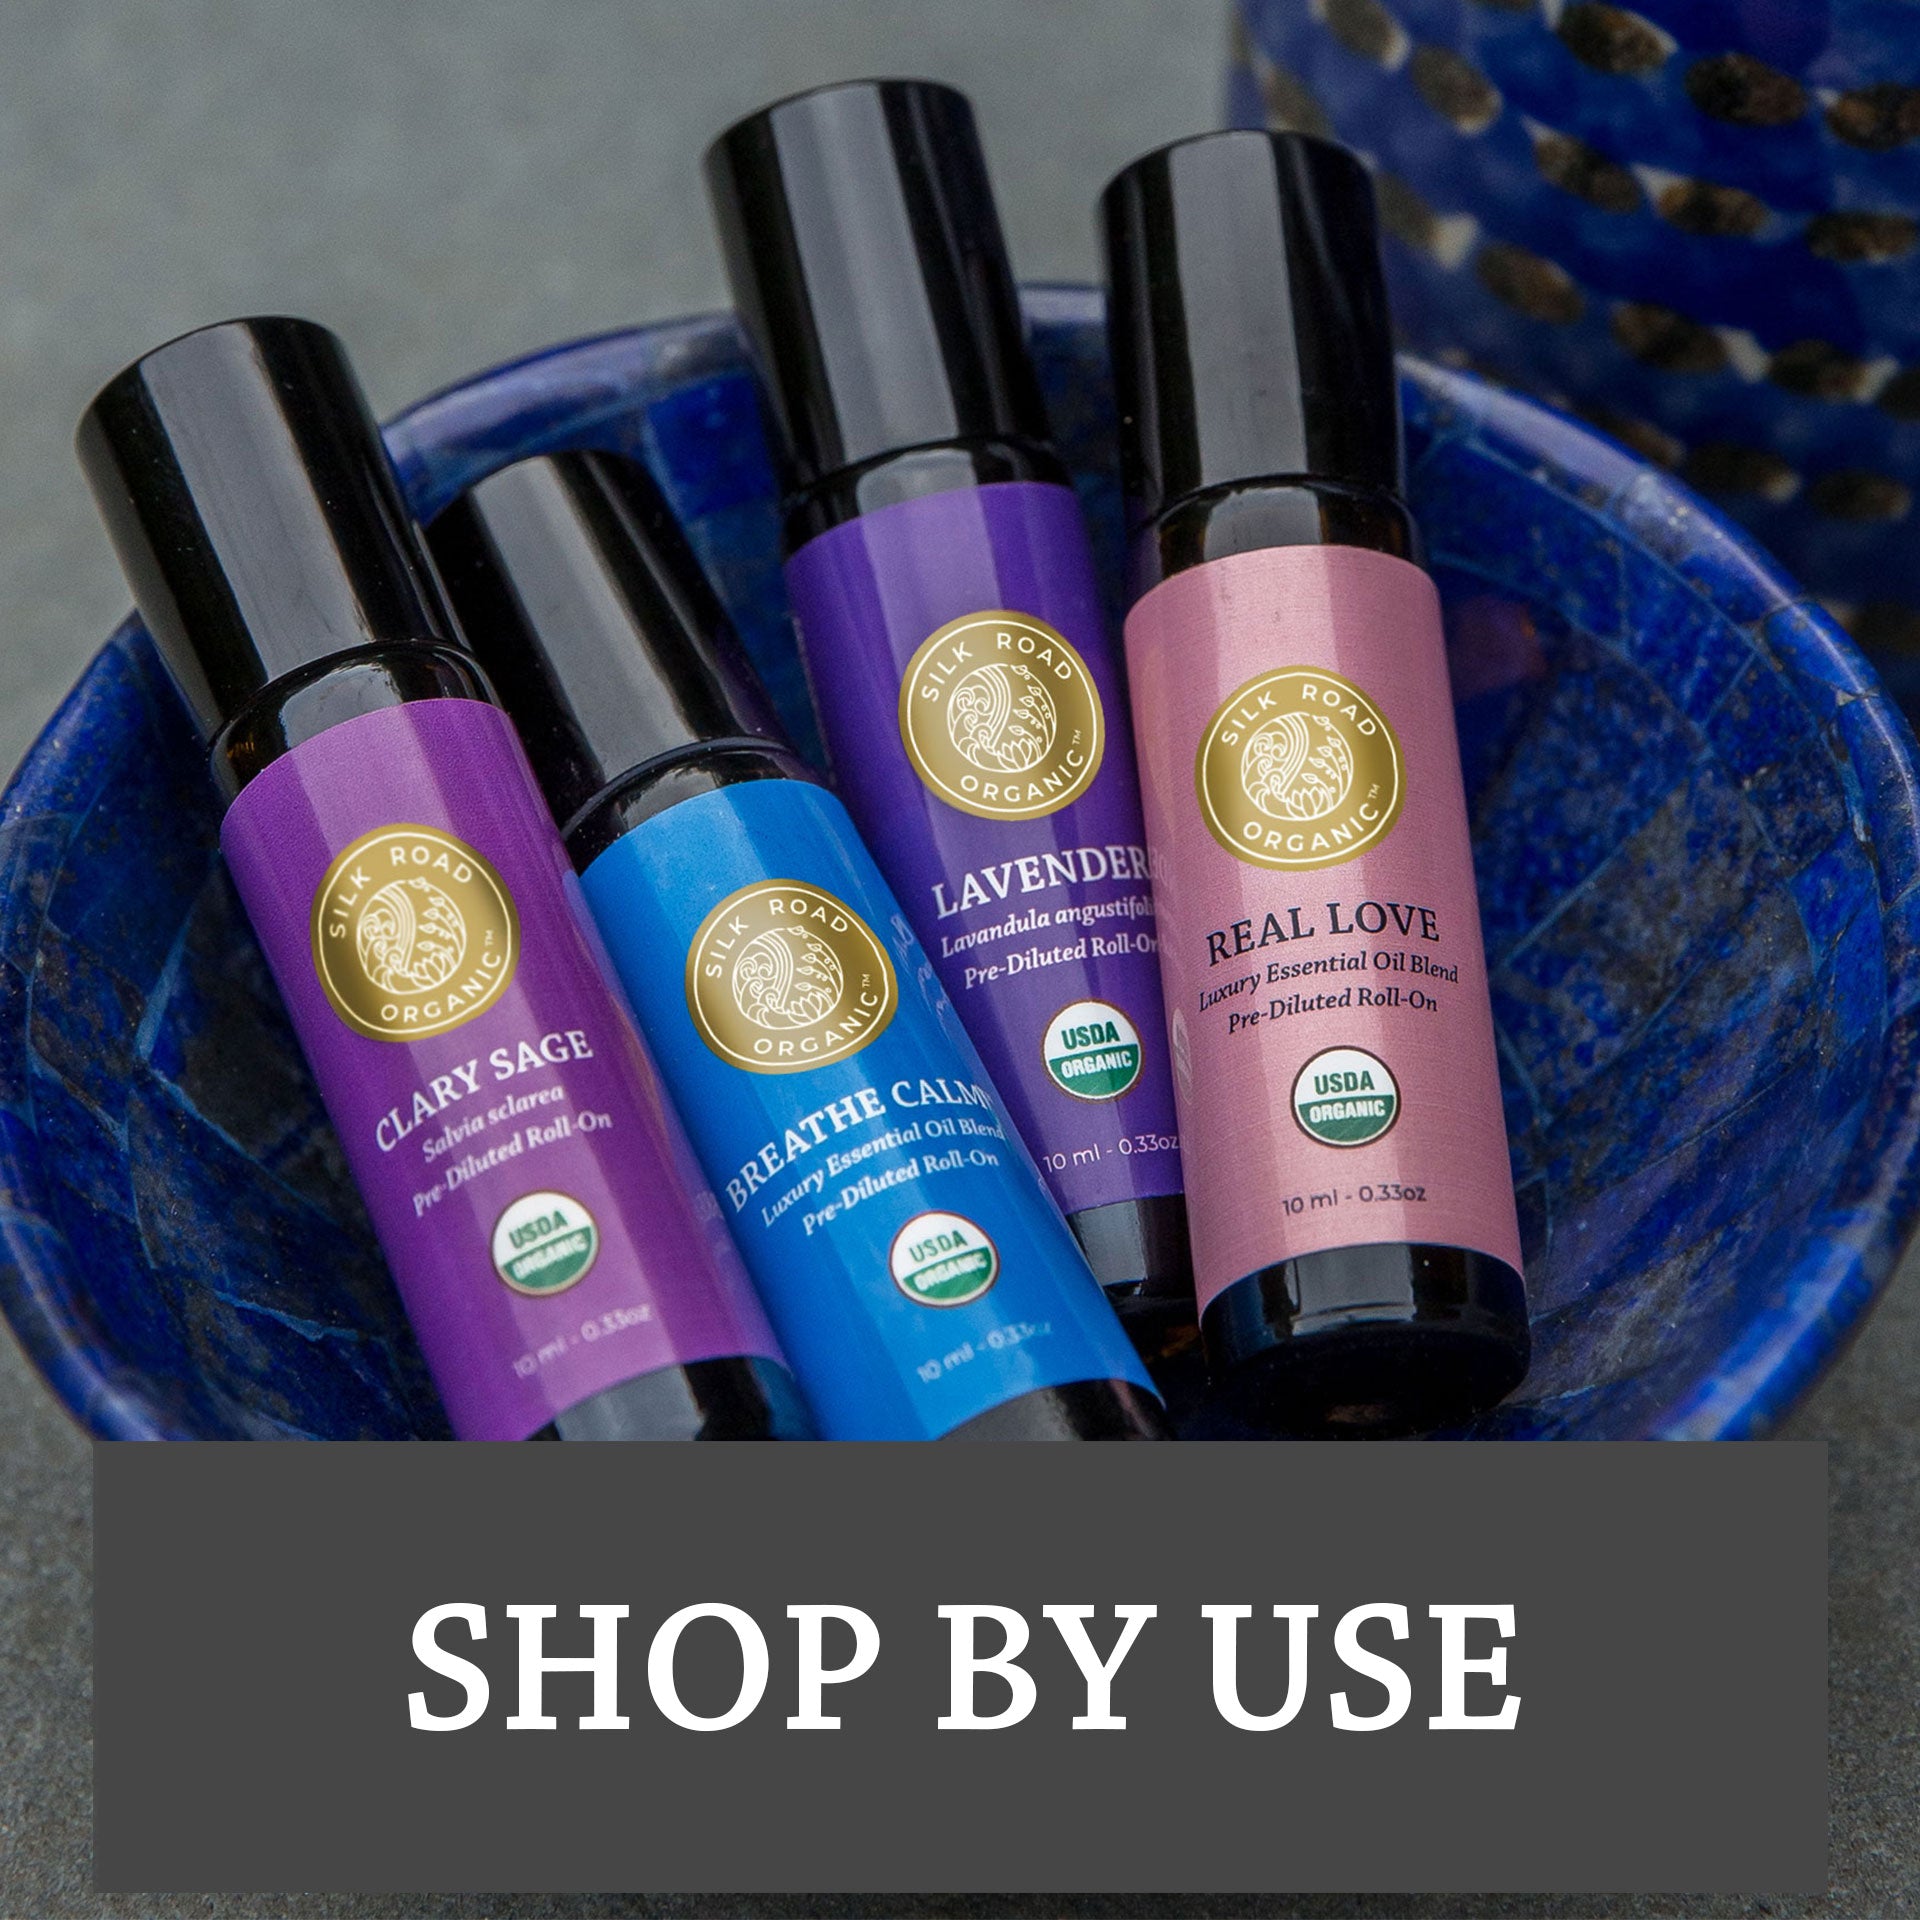 shop by use essential oil roll on clary sage breathe calm lavender real love solutions for stress sleep skin health